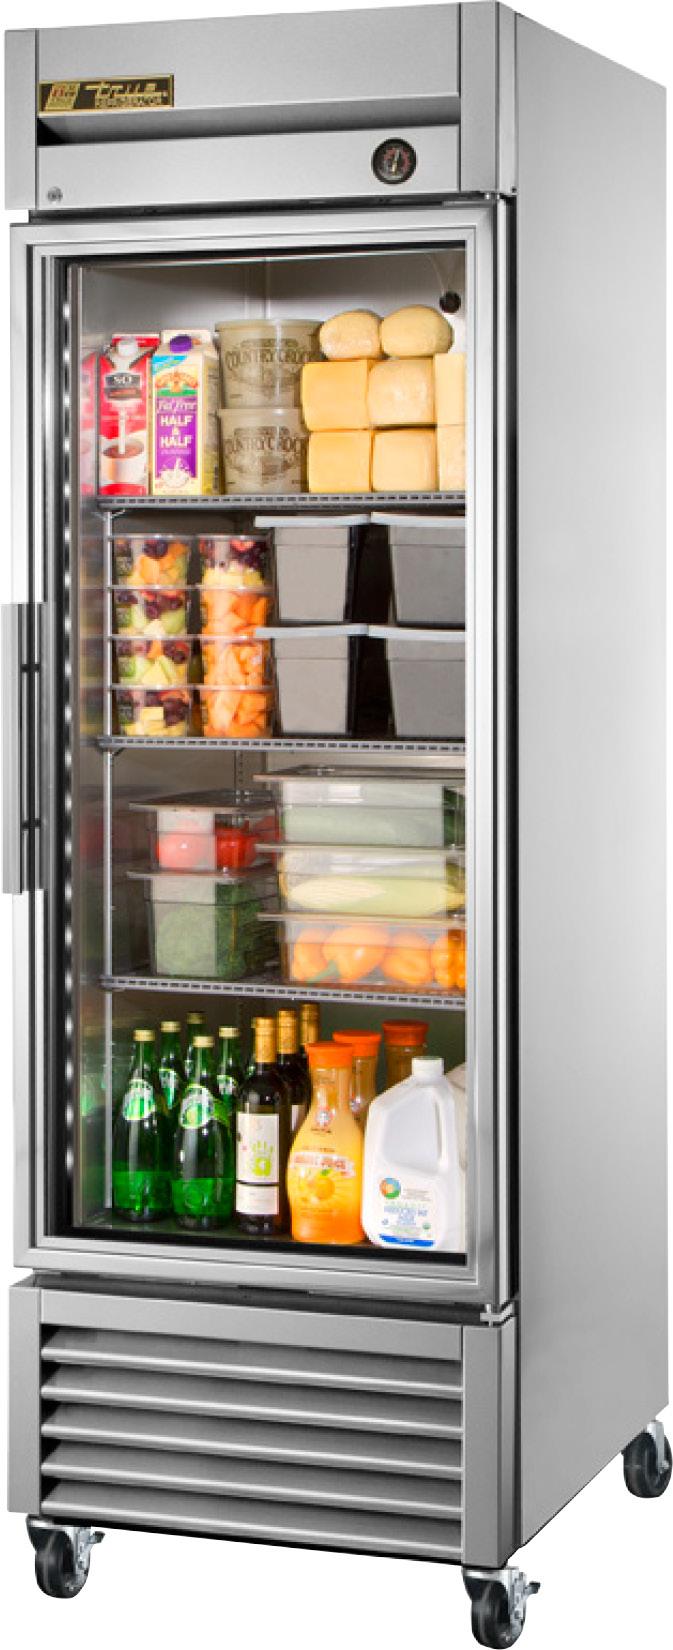 Stainless Steel Upright Refrigeration/Cooler All prices exclude delivery and of course, taxes.